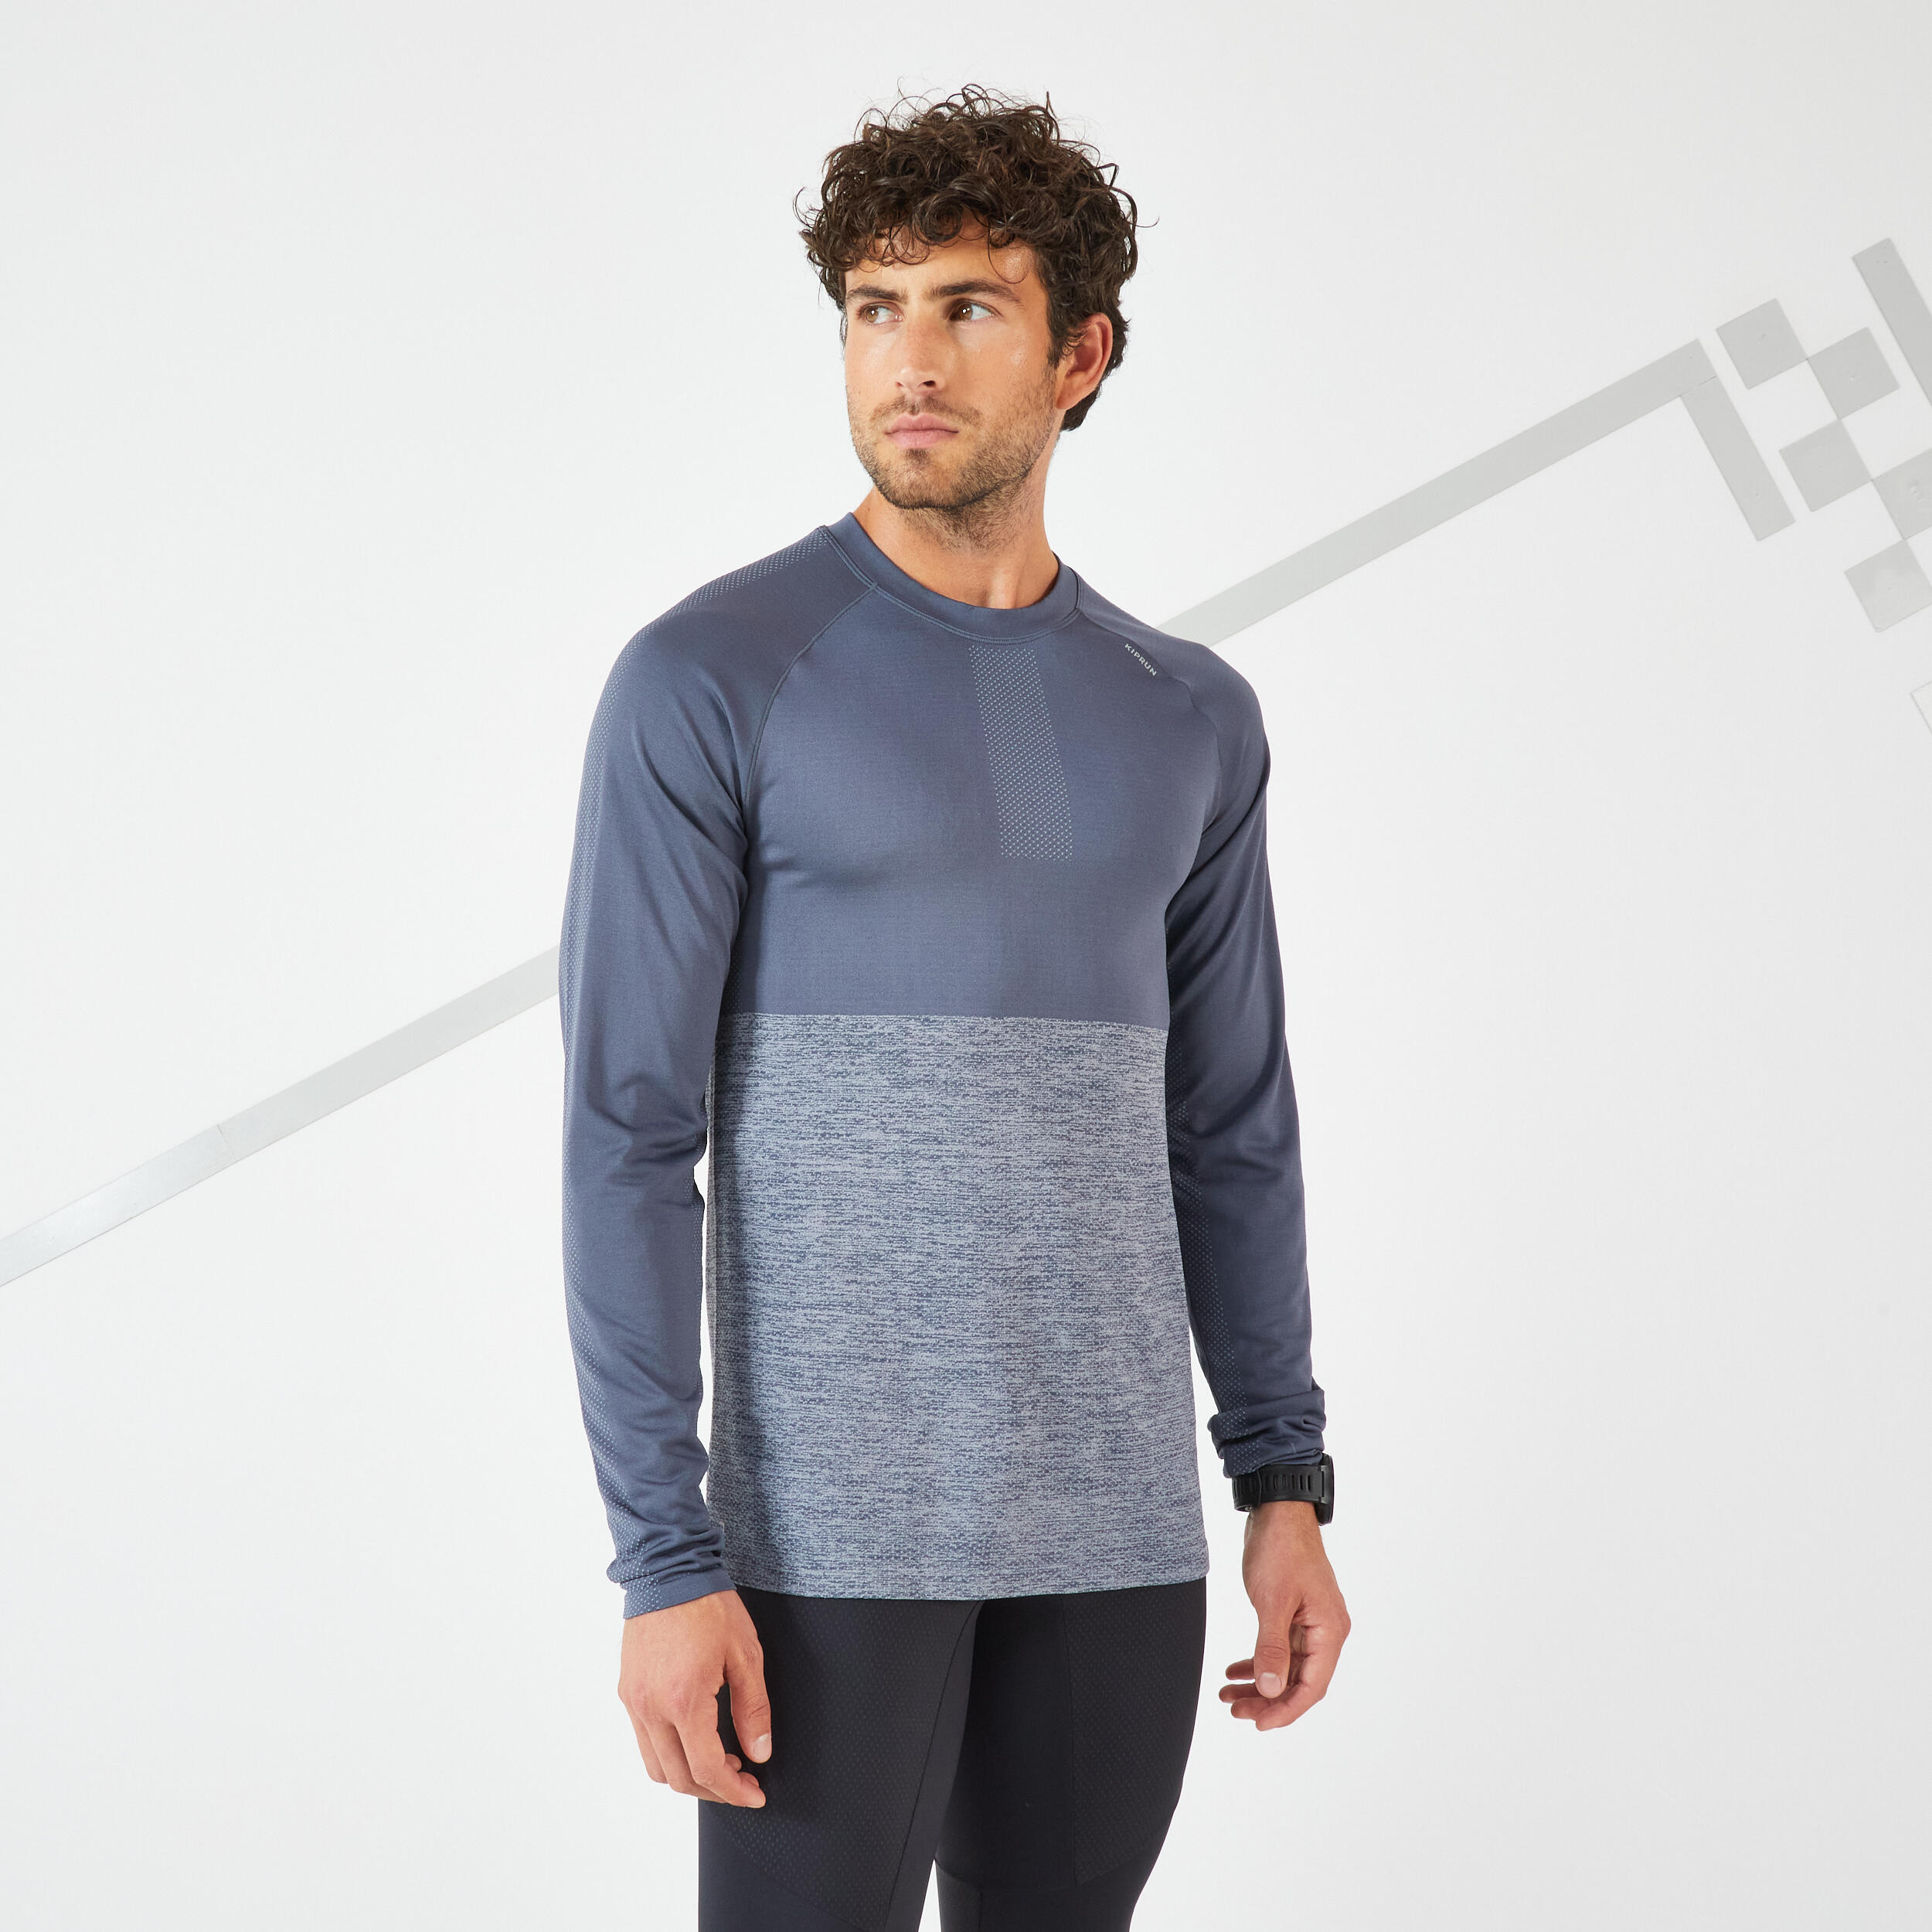 CARE MEN'S BREATHABLE LONG-SLEEVED RUNNING T-SHIRT - GREY LIMITED EDITION 1/9